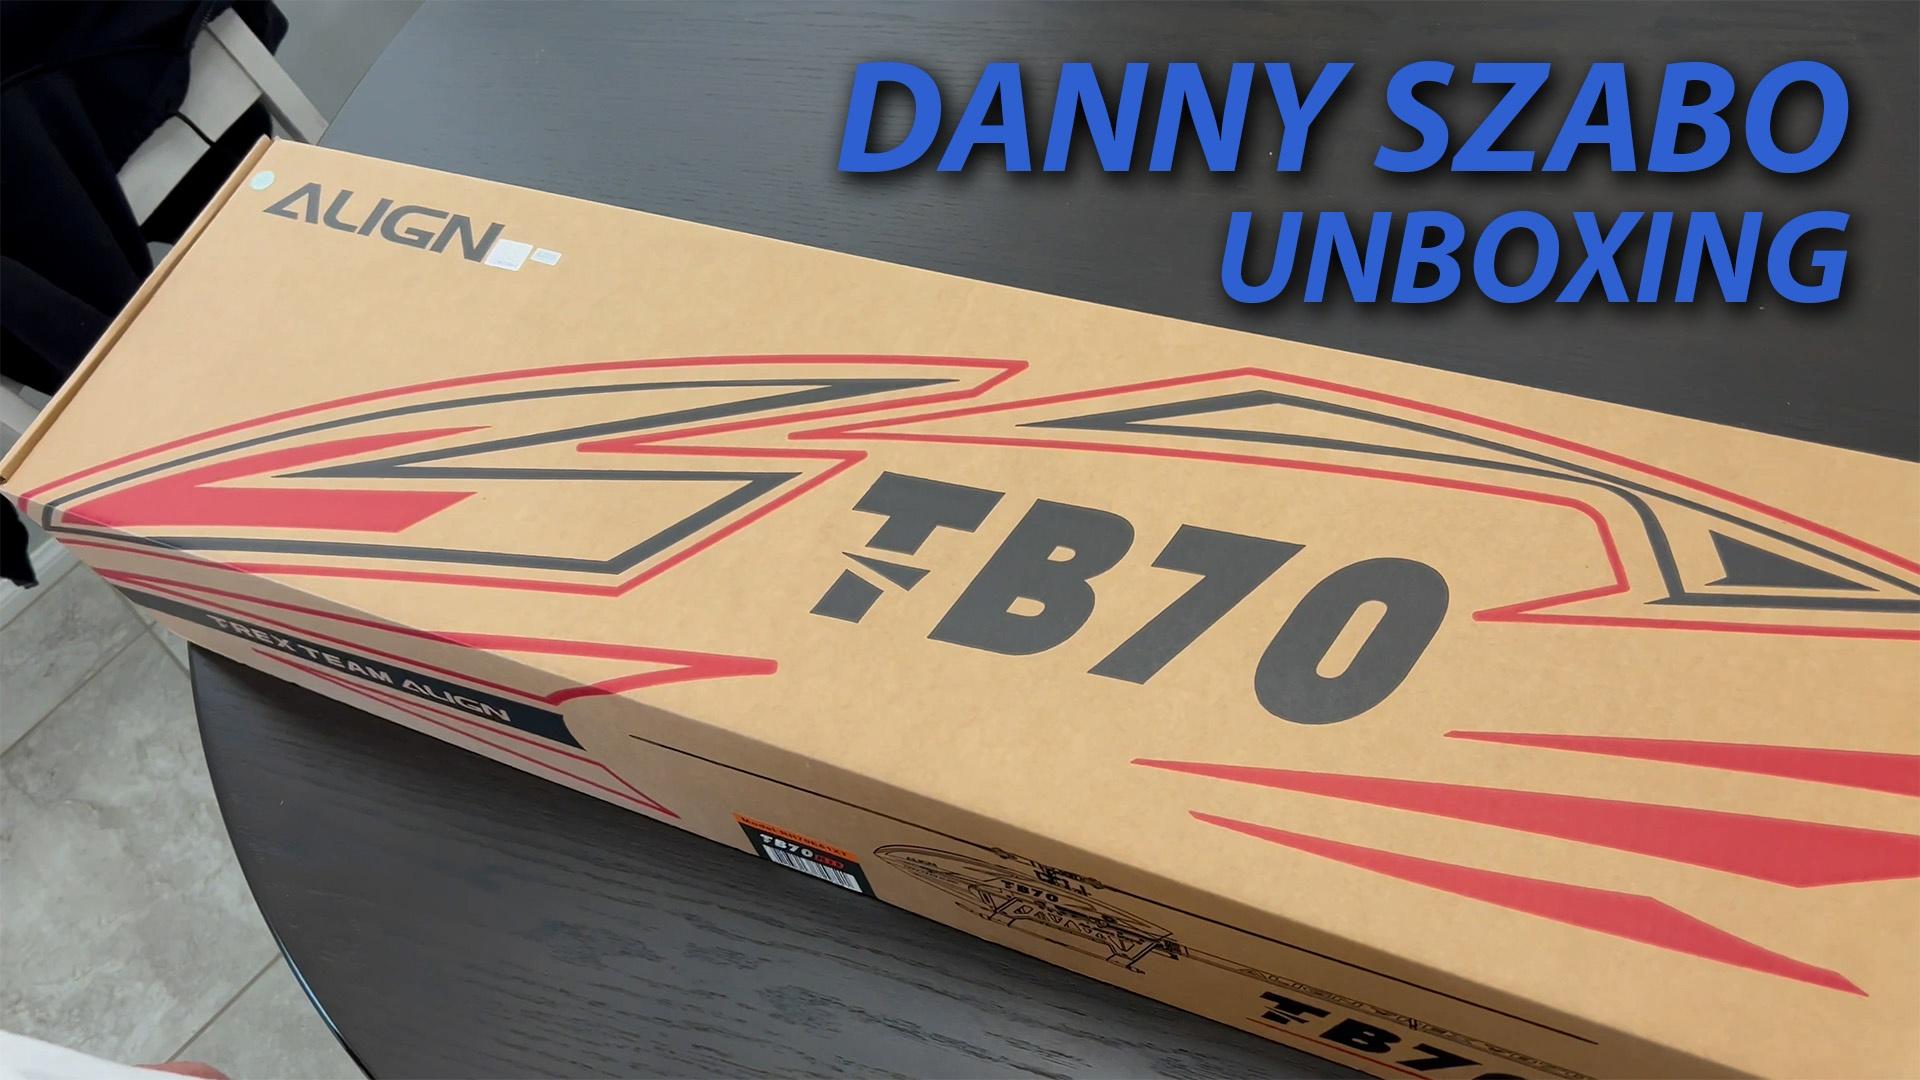 Danny Szabo Unboxing the ALIGN TB70 Tail Belt Driven Helicopter